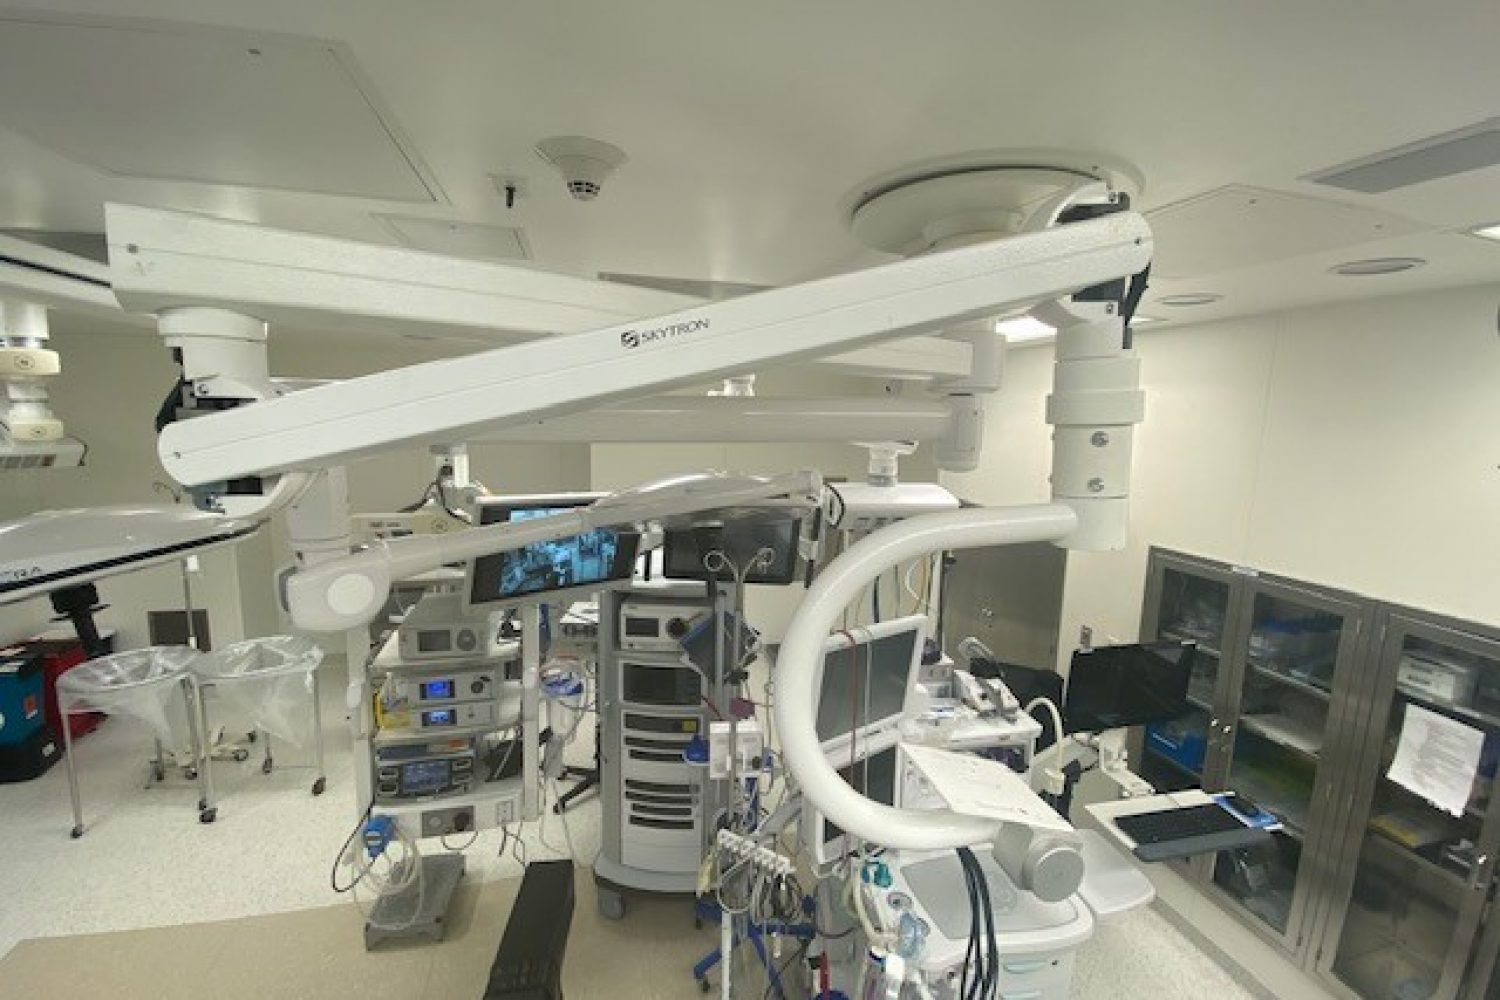 Skytron Spring Arm Replacement at Athens Regional Medical Center